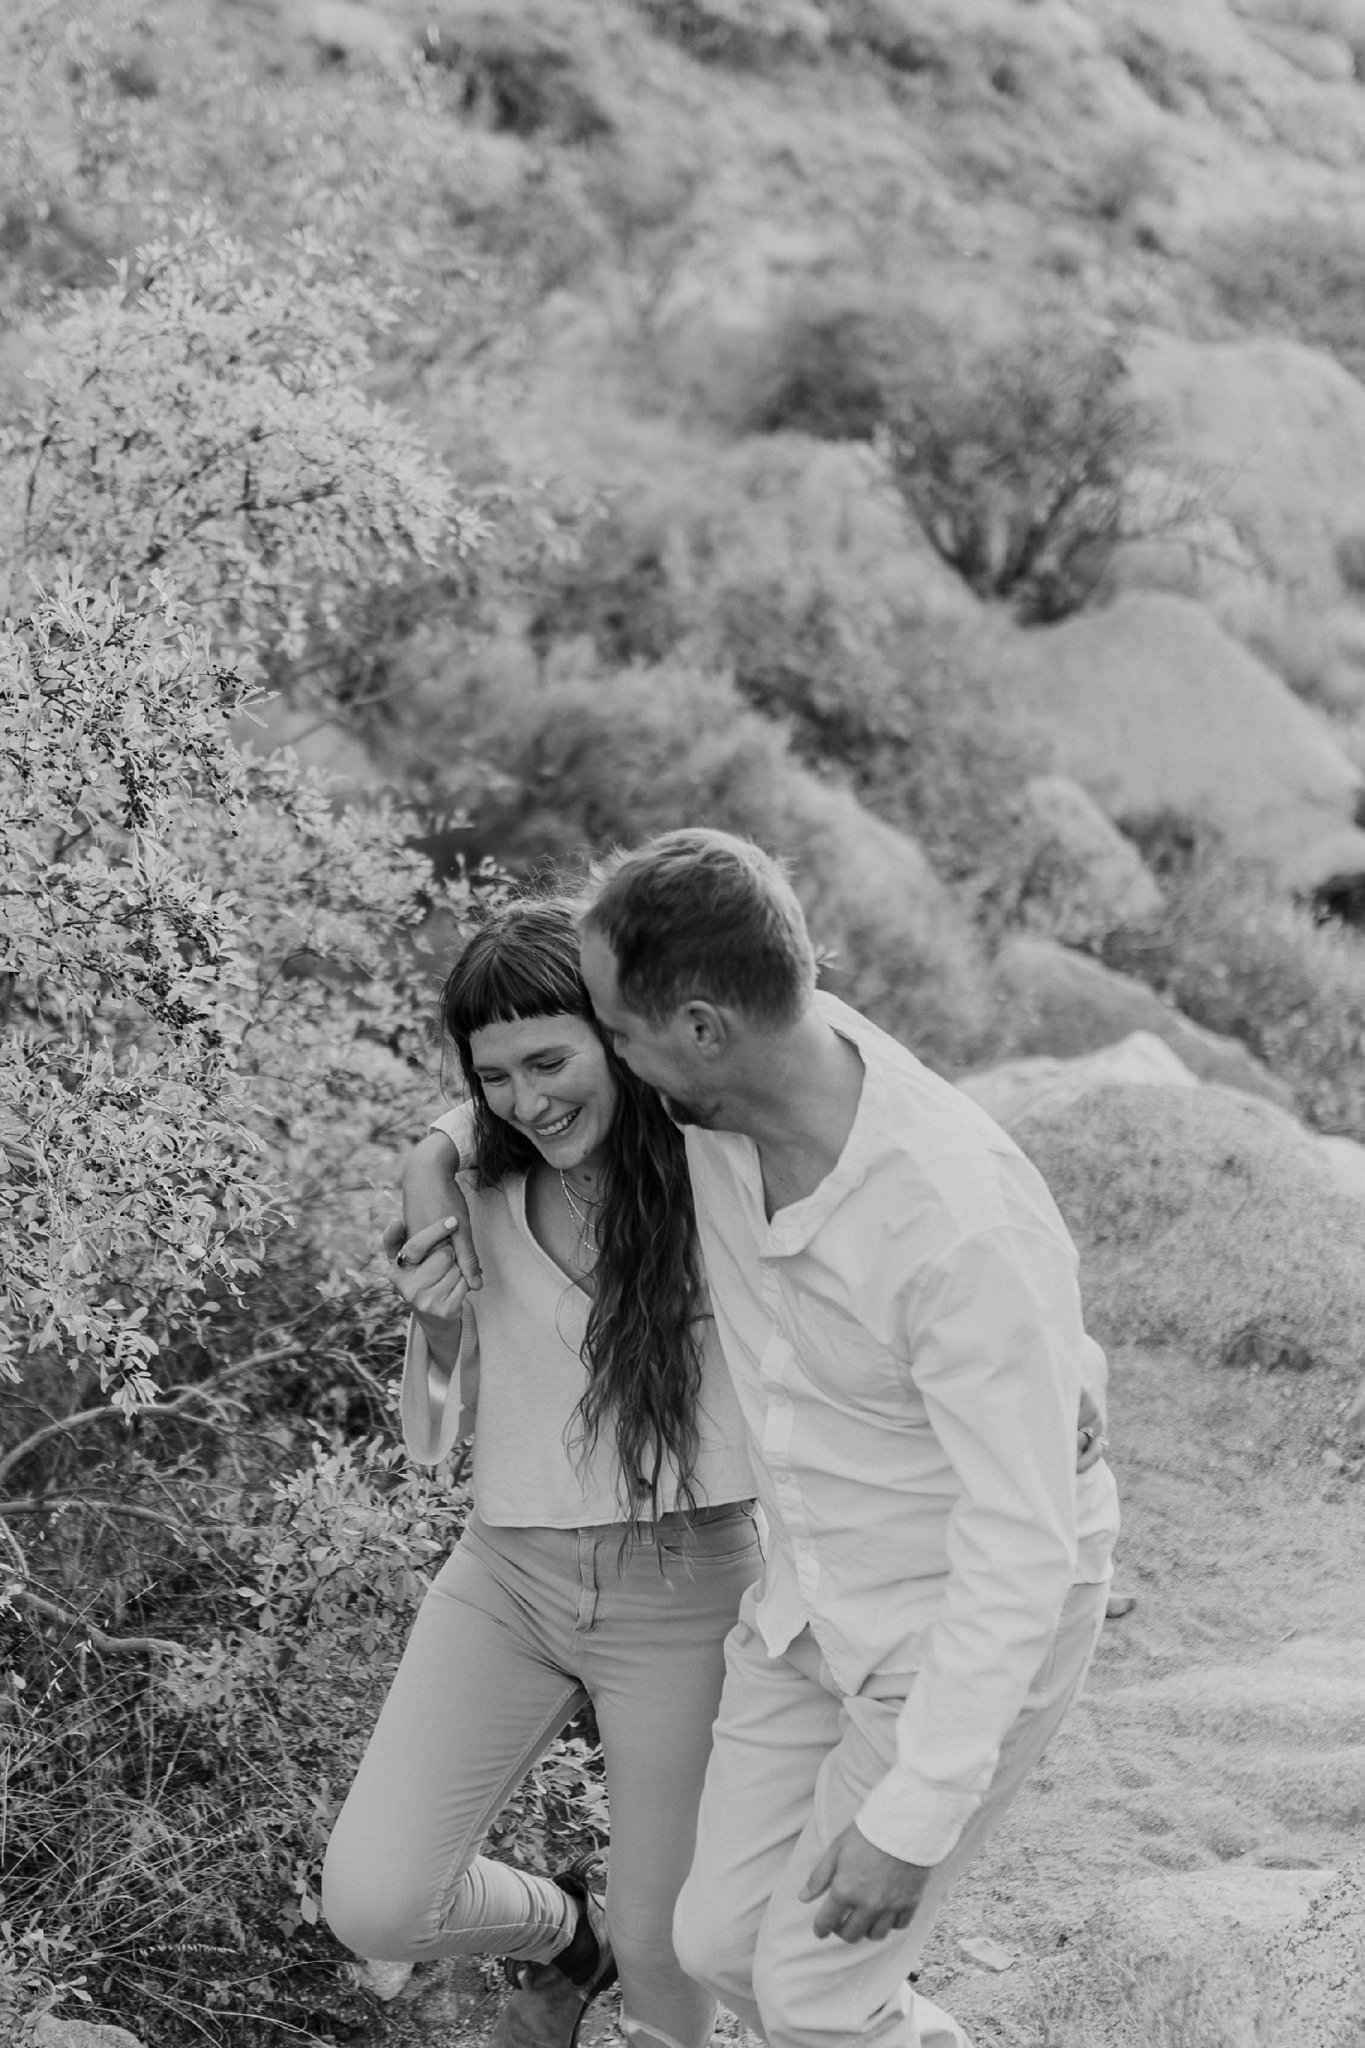 Alicia+lucia+photography+-+albuquerque+wedding+photographer+-+santa+fe+wedding+photography+-+new+mexico+wedding+photographer+-+new+mexico+wedding+-+desert+engagement+-+foothills+engagement+-+mountain+engagement_0023.jpg